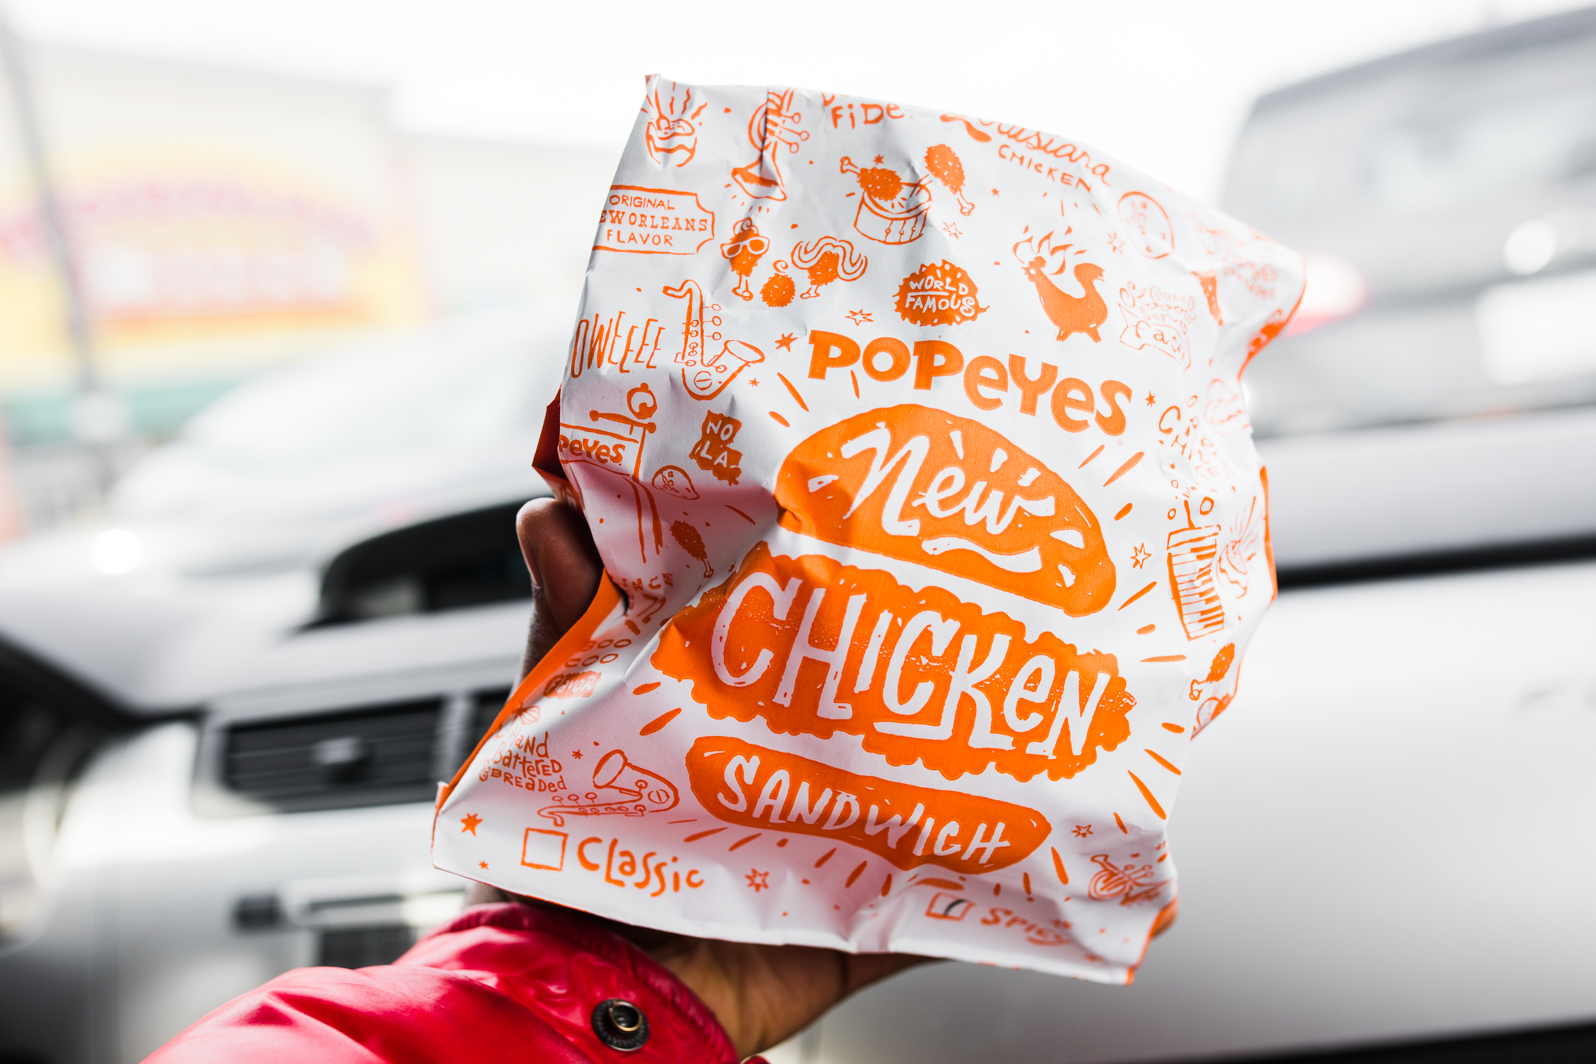 Who's got the best spicy chicken in the city? You decide!